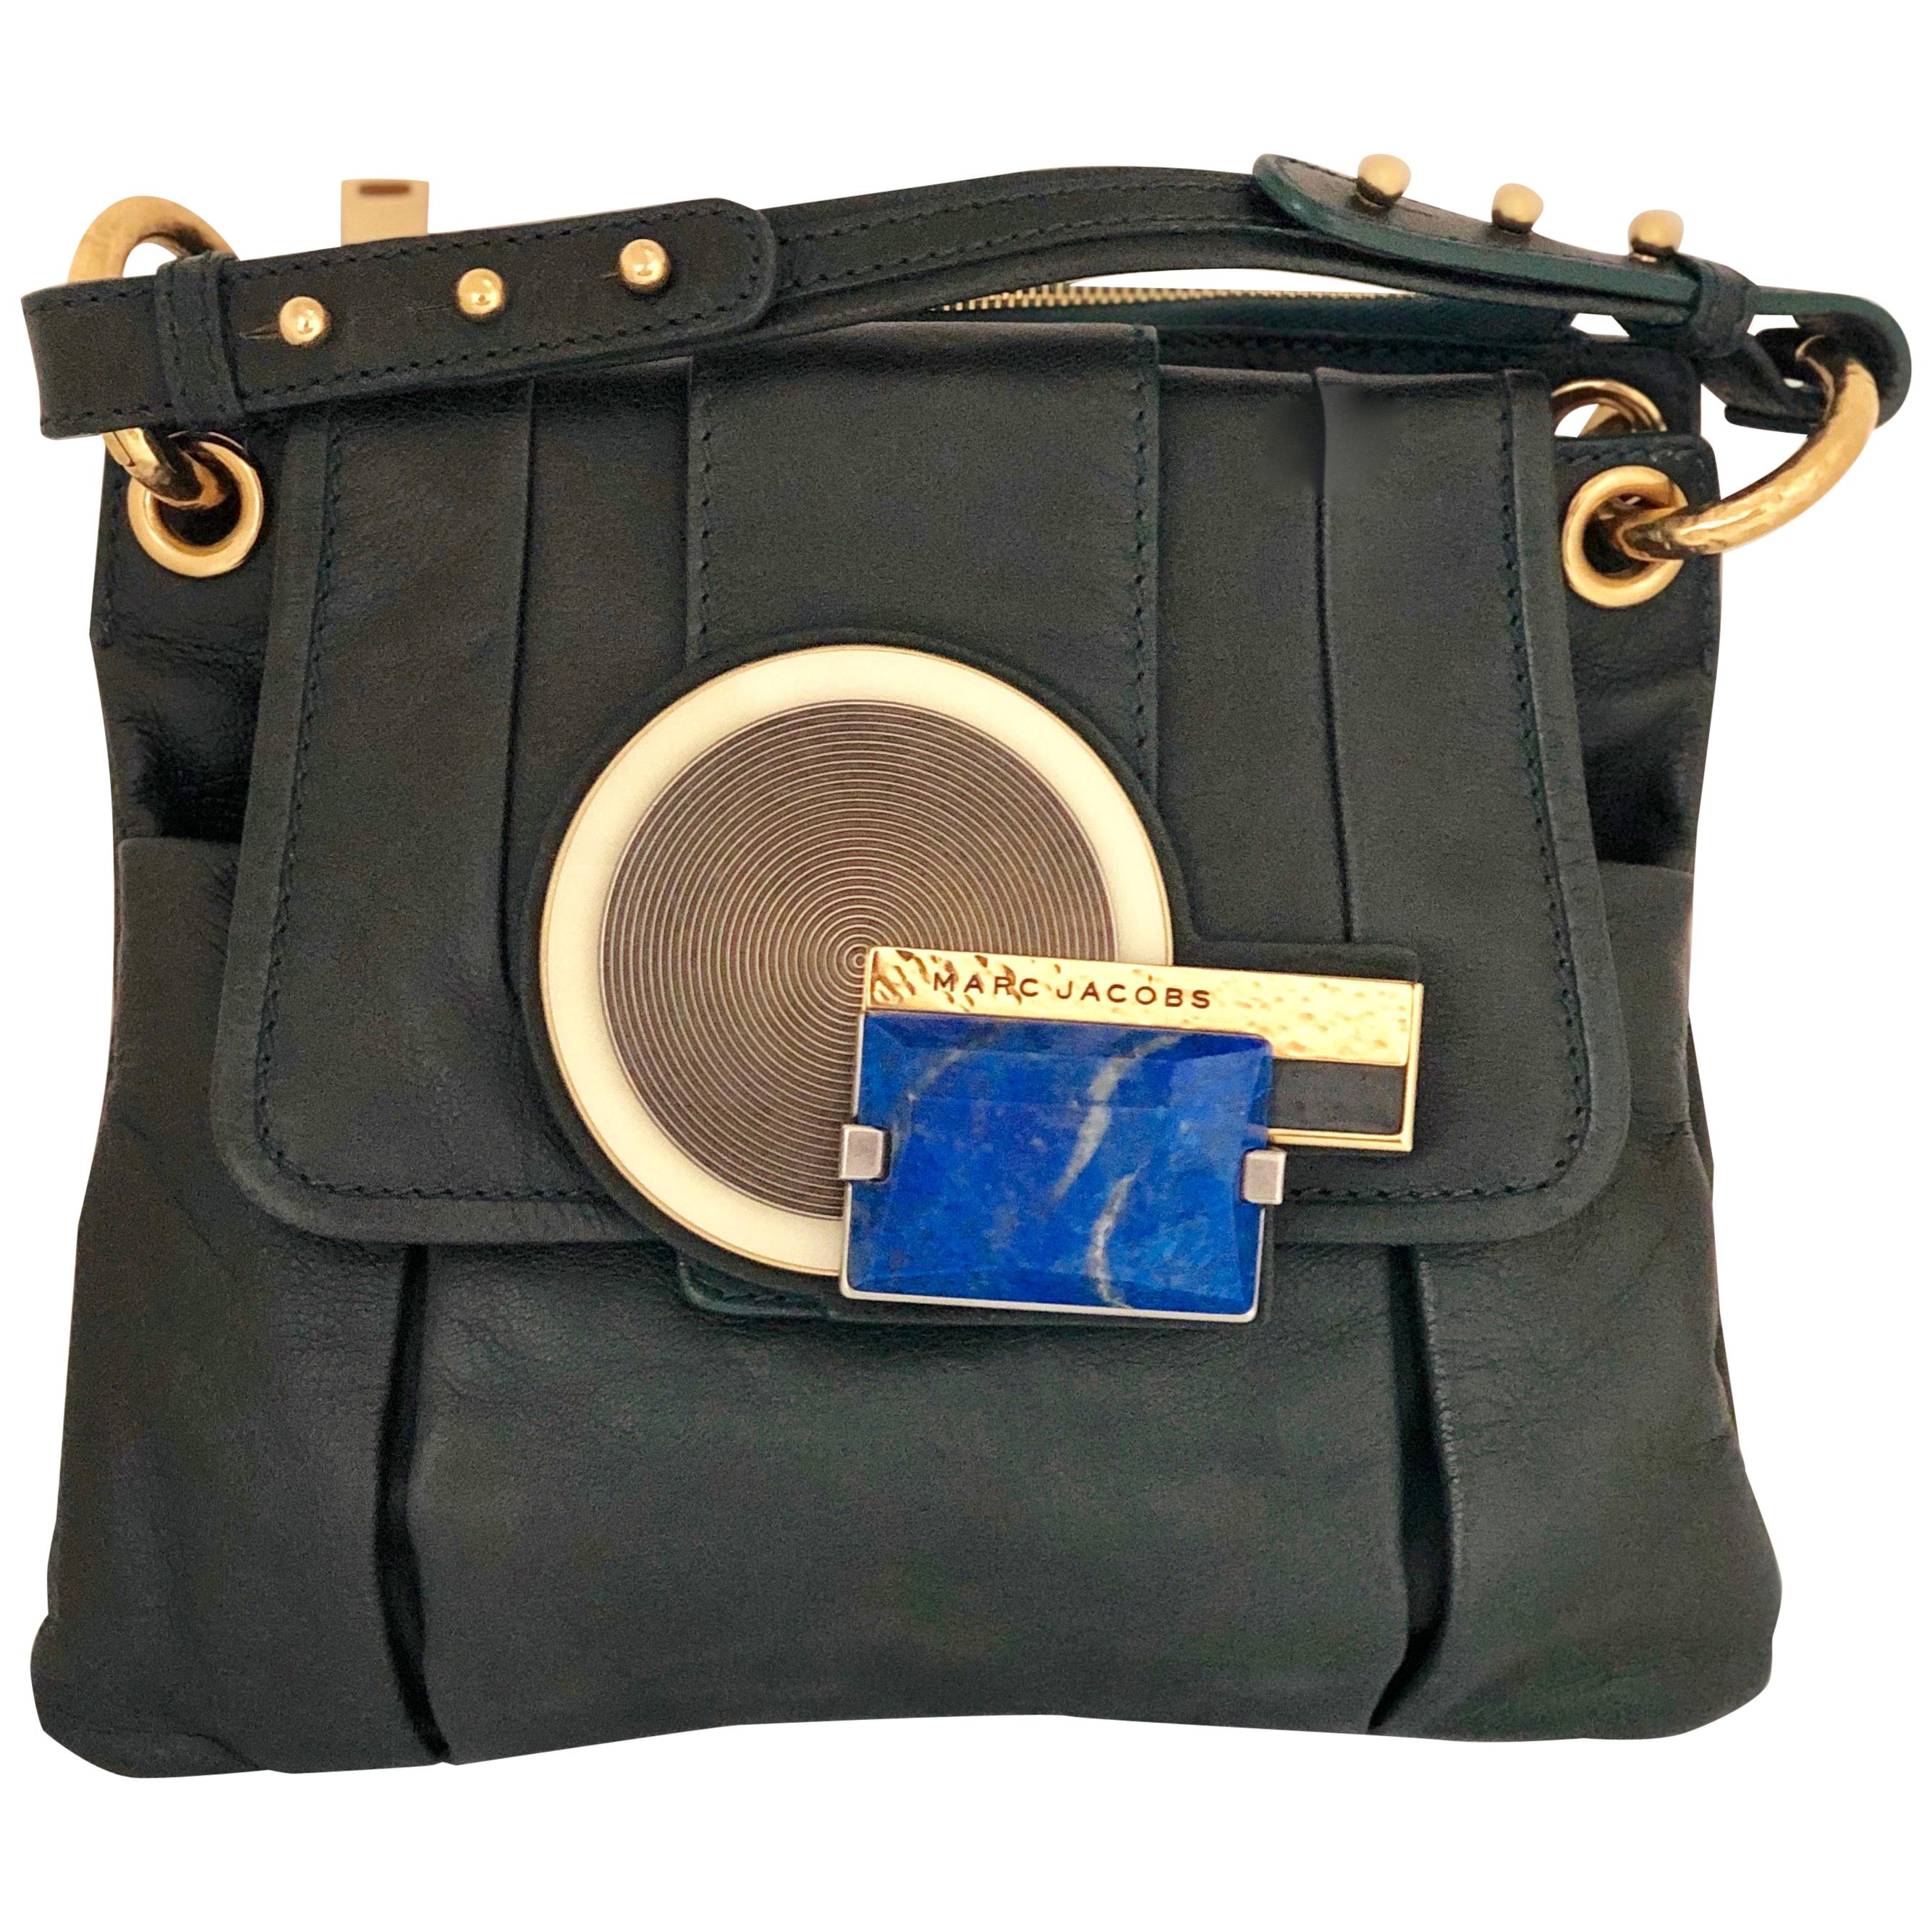 Marc Jacobs Green Leather Double Saddlebag w/ Top Handle & Metal / Jewel Accents